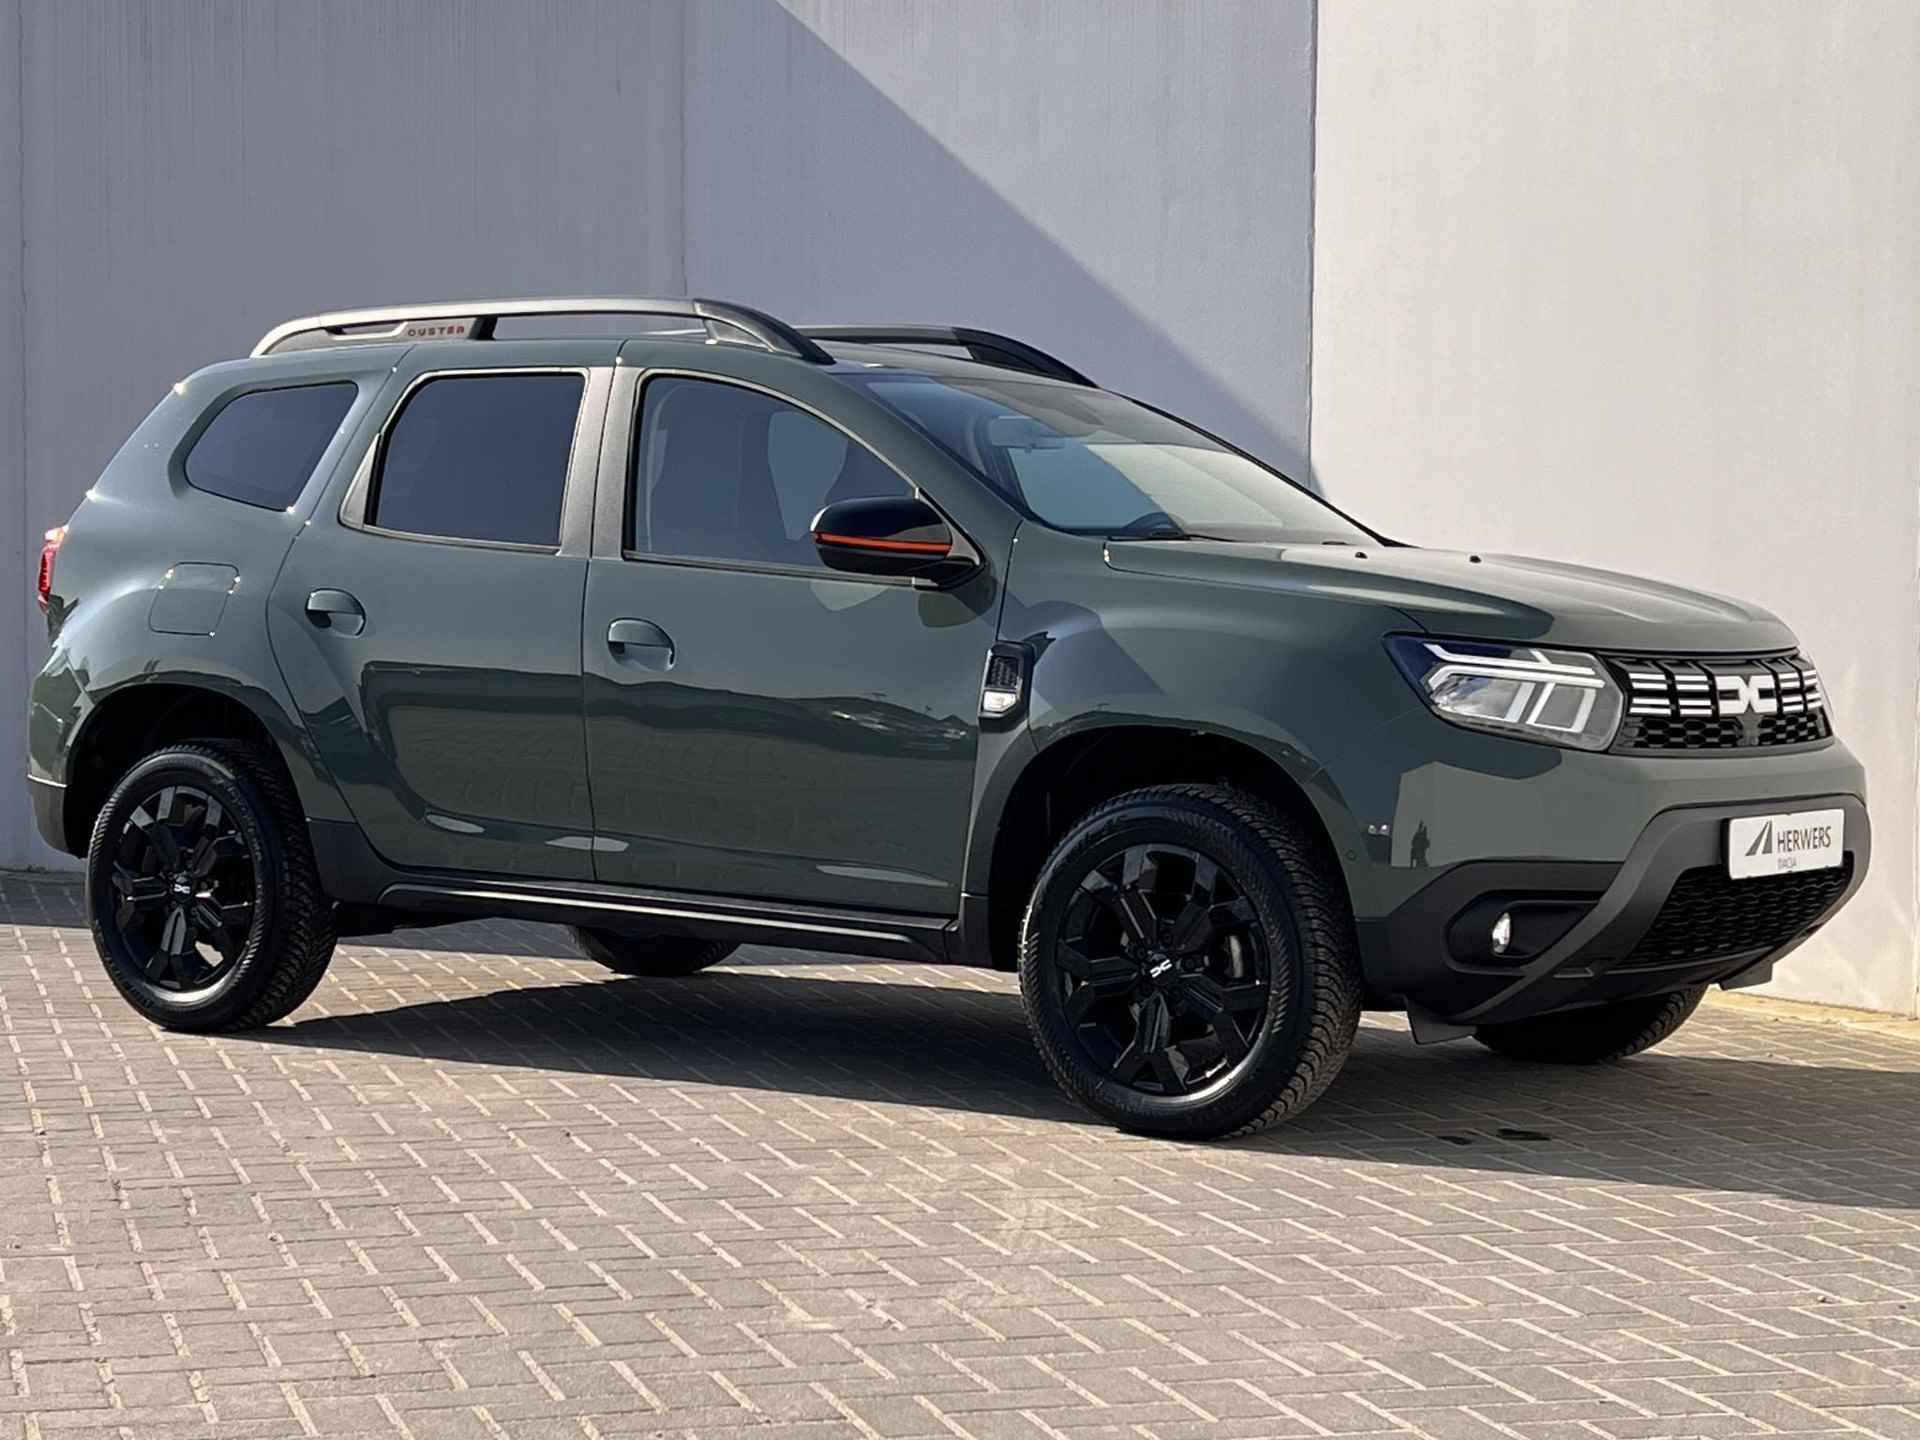 Dacia Duster 1.3 TCe 150 Extreme Automaat / Navigatie / Camera 360° / Apple Carplay Android / All Season banden / - 40/49